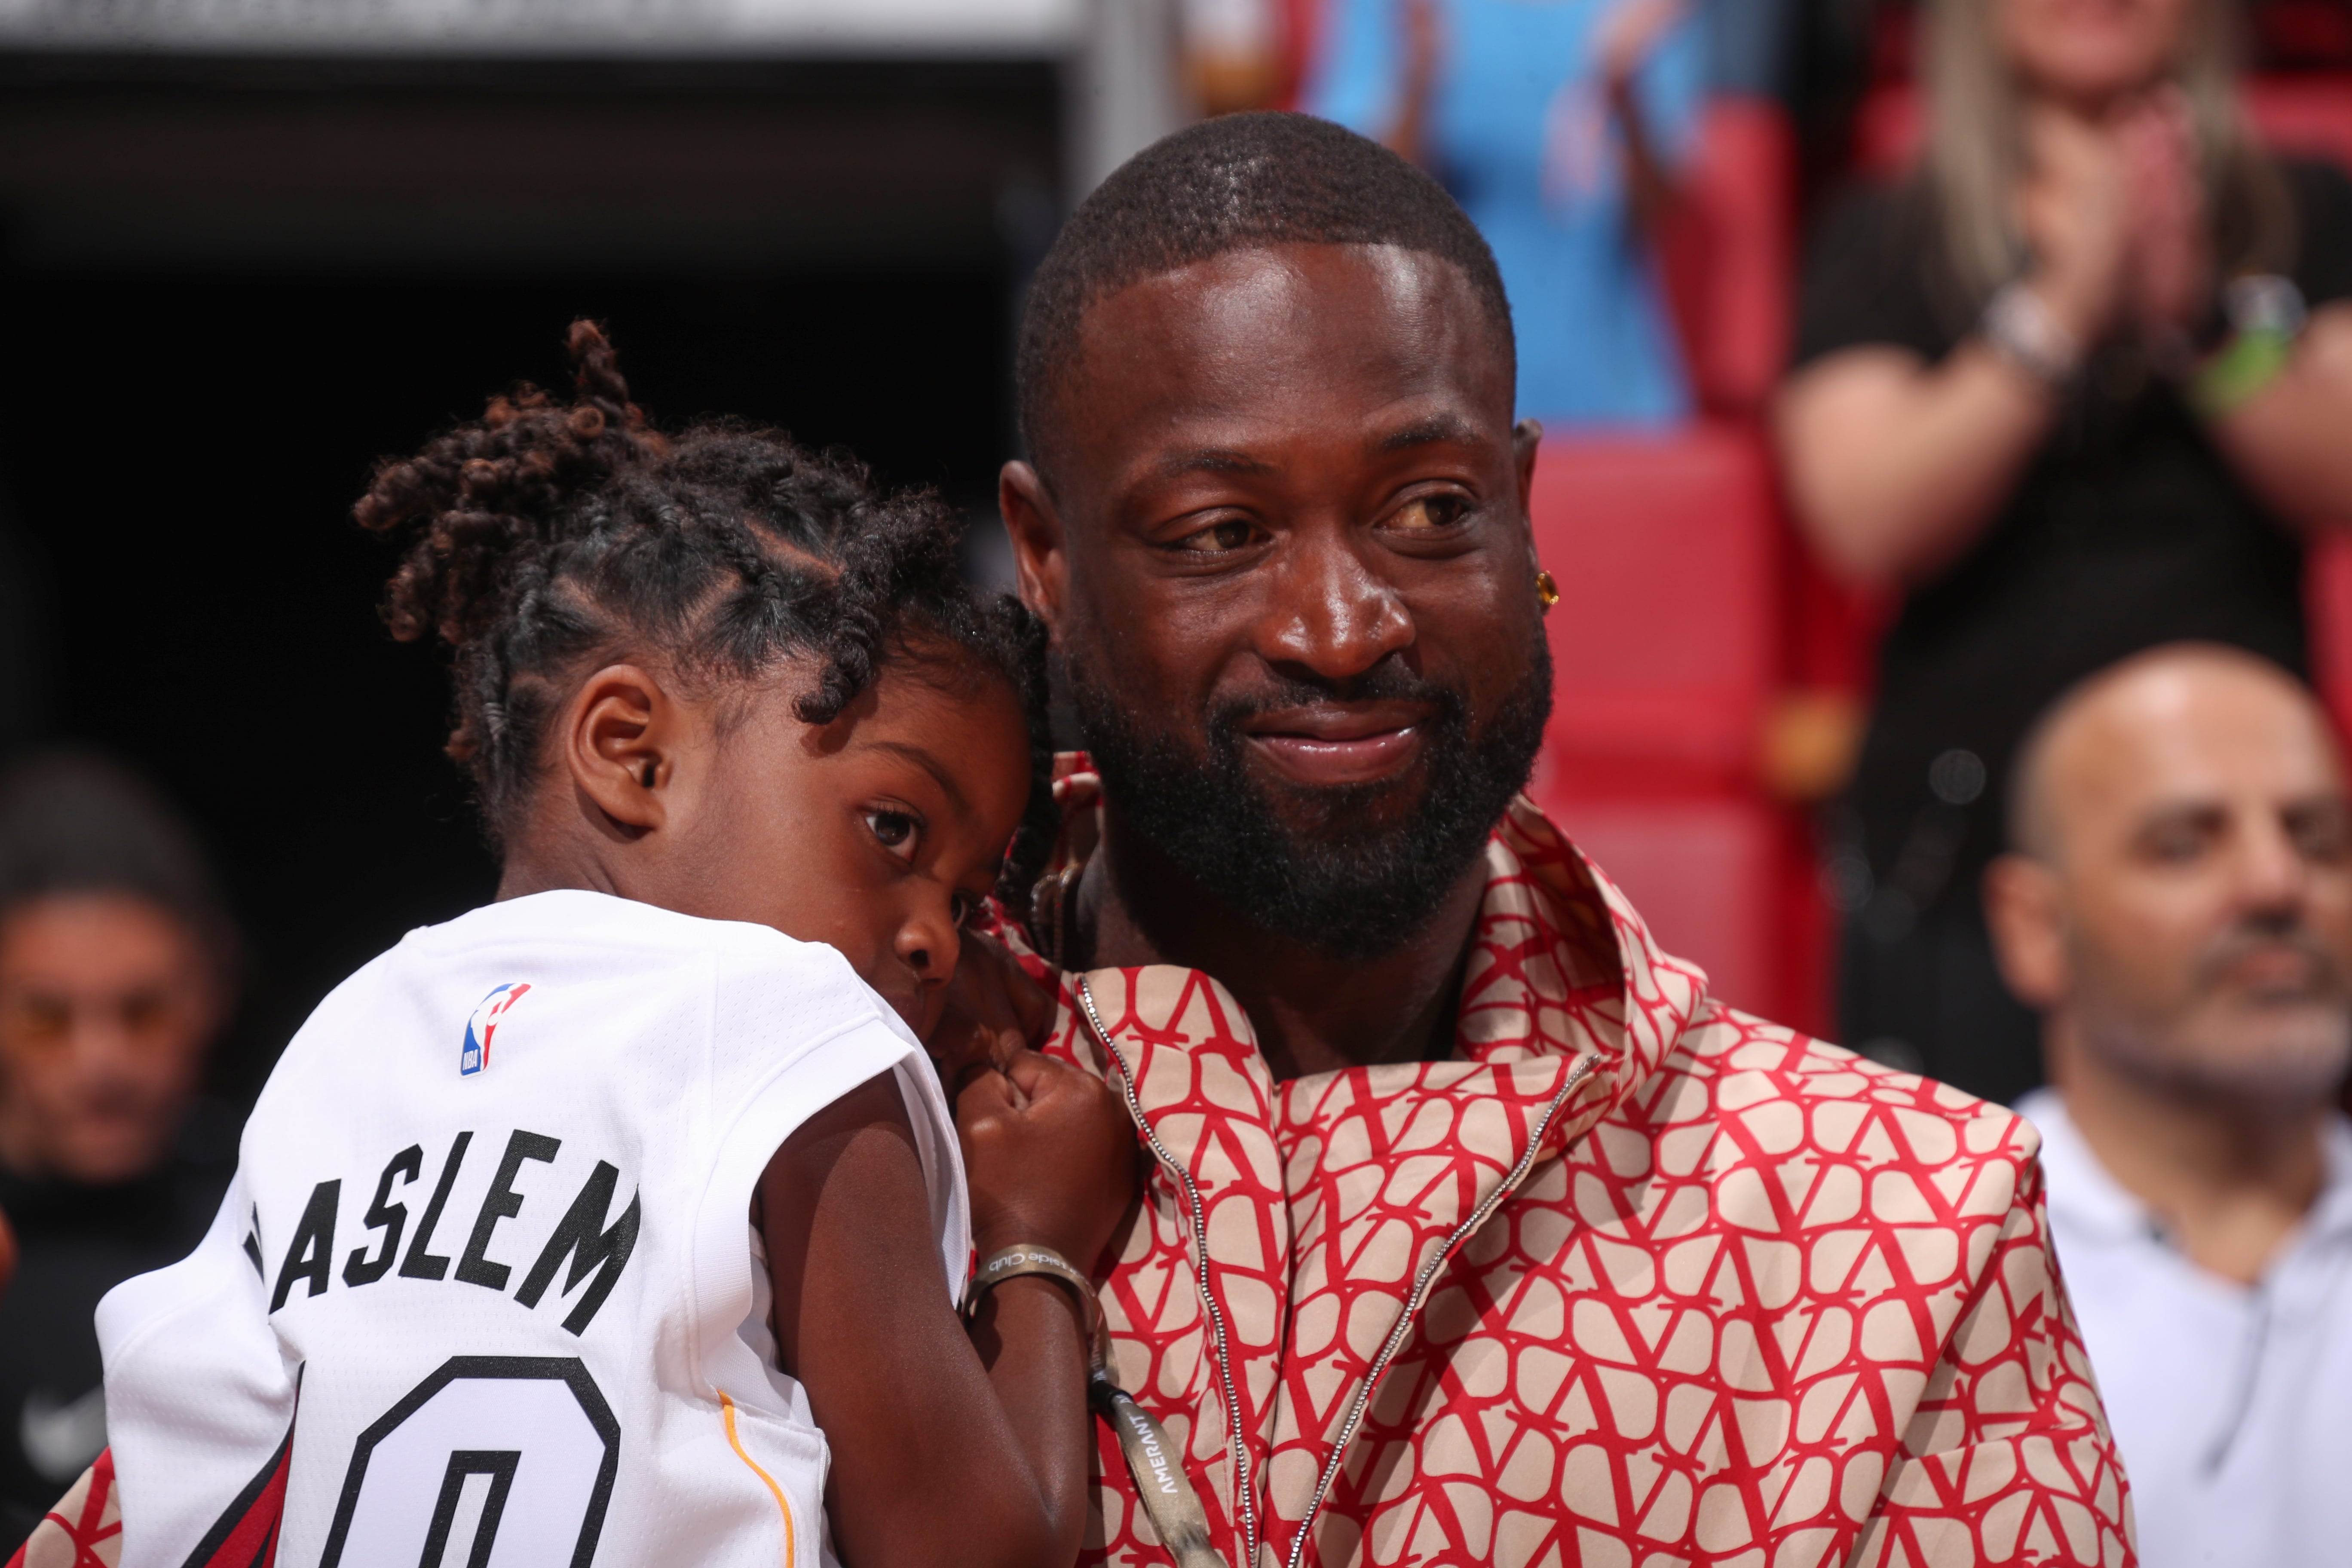 Dwyane Wade Returns To Miami For The First Time! 